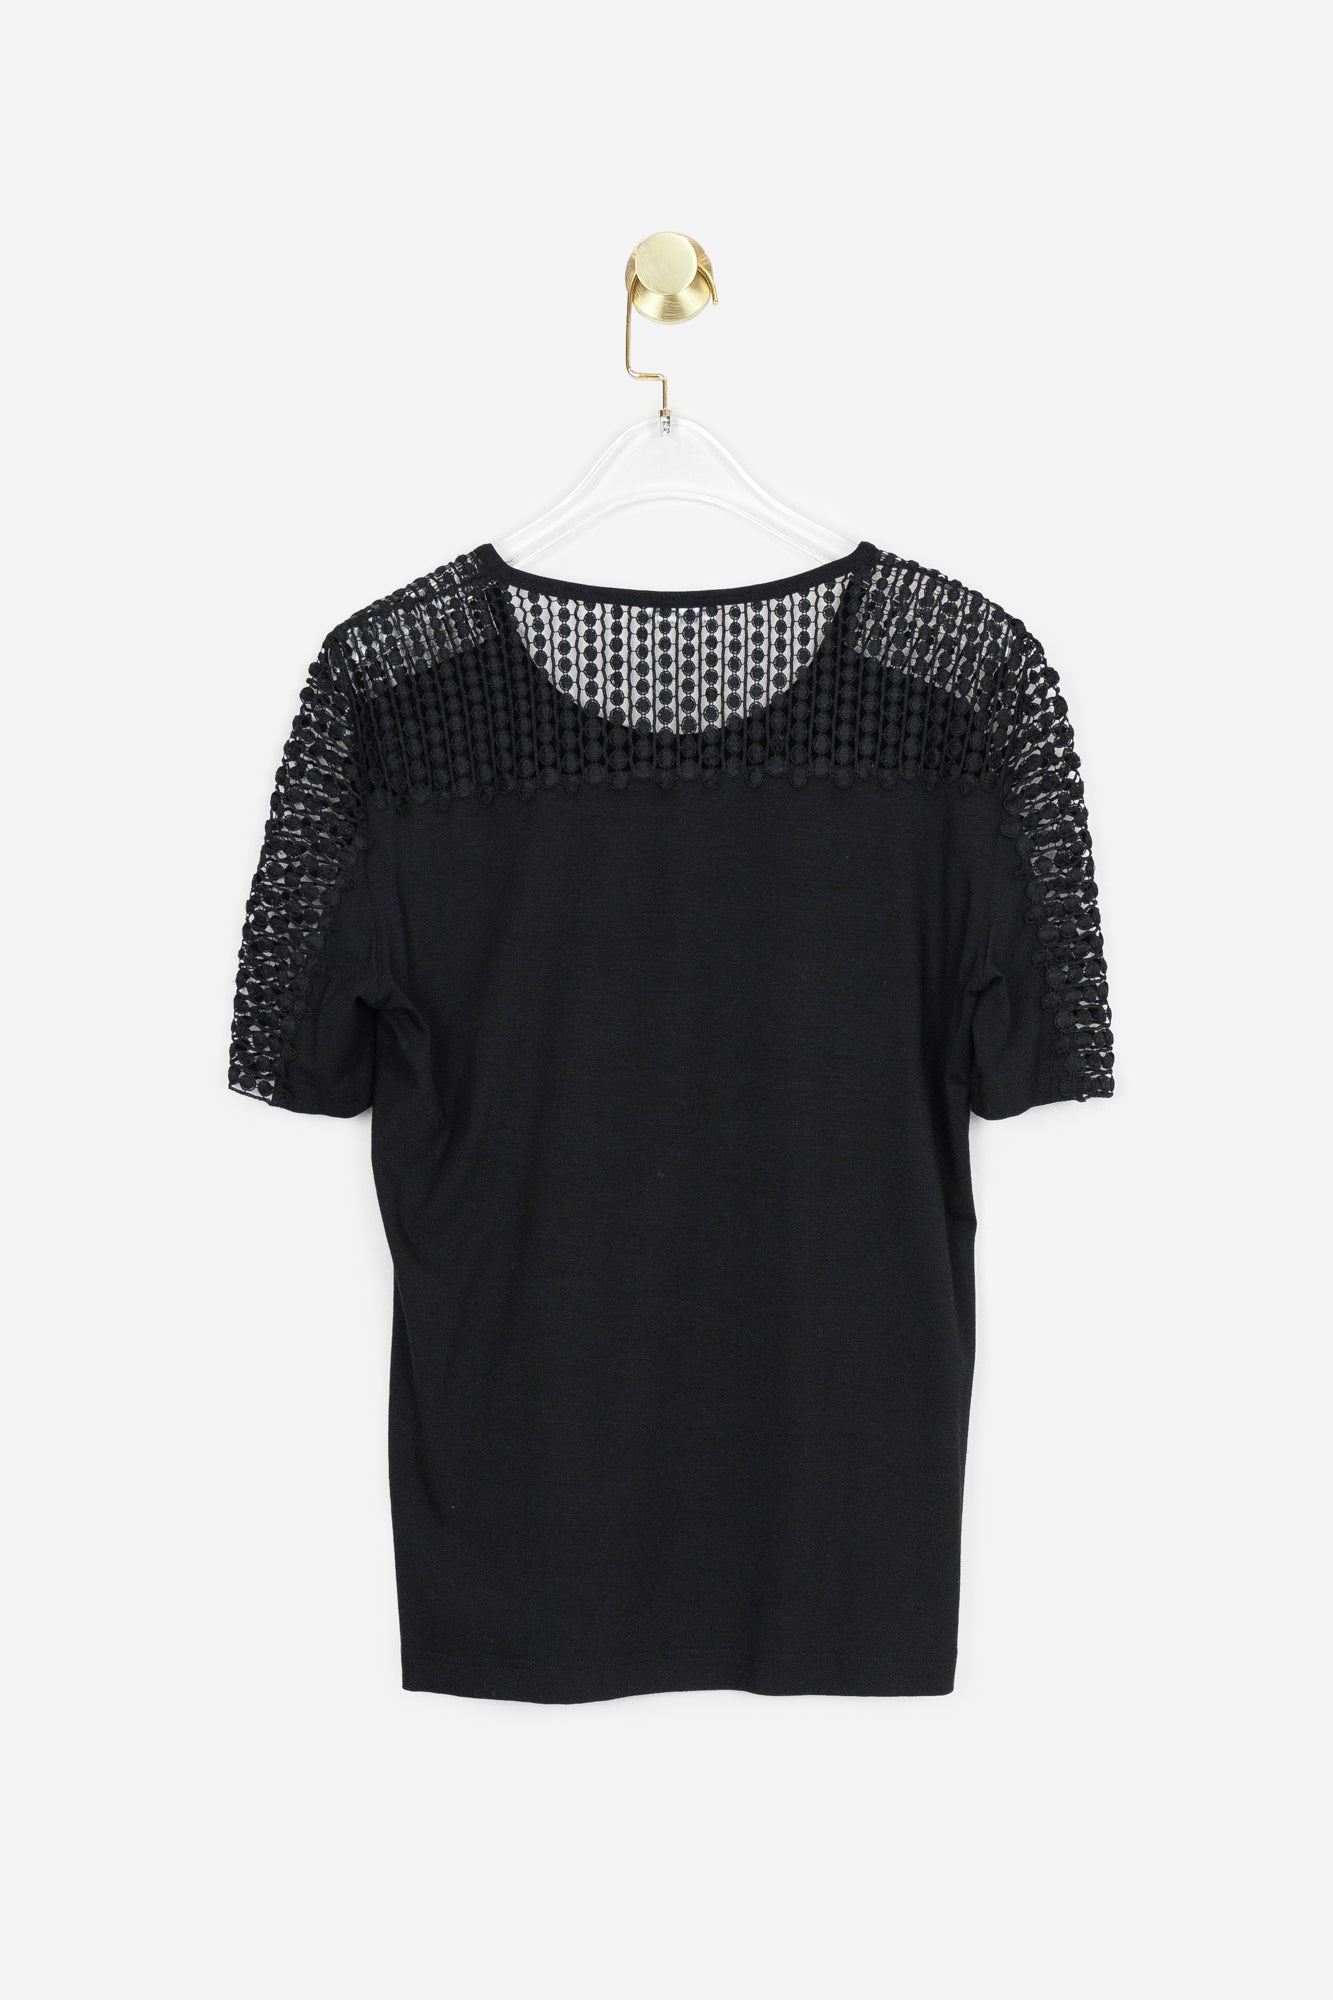 Black Shirt with Knitted Details